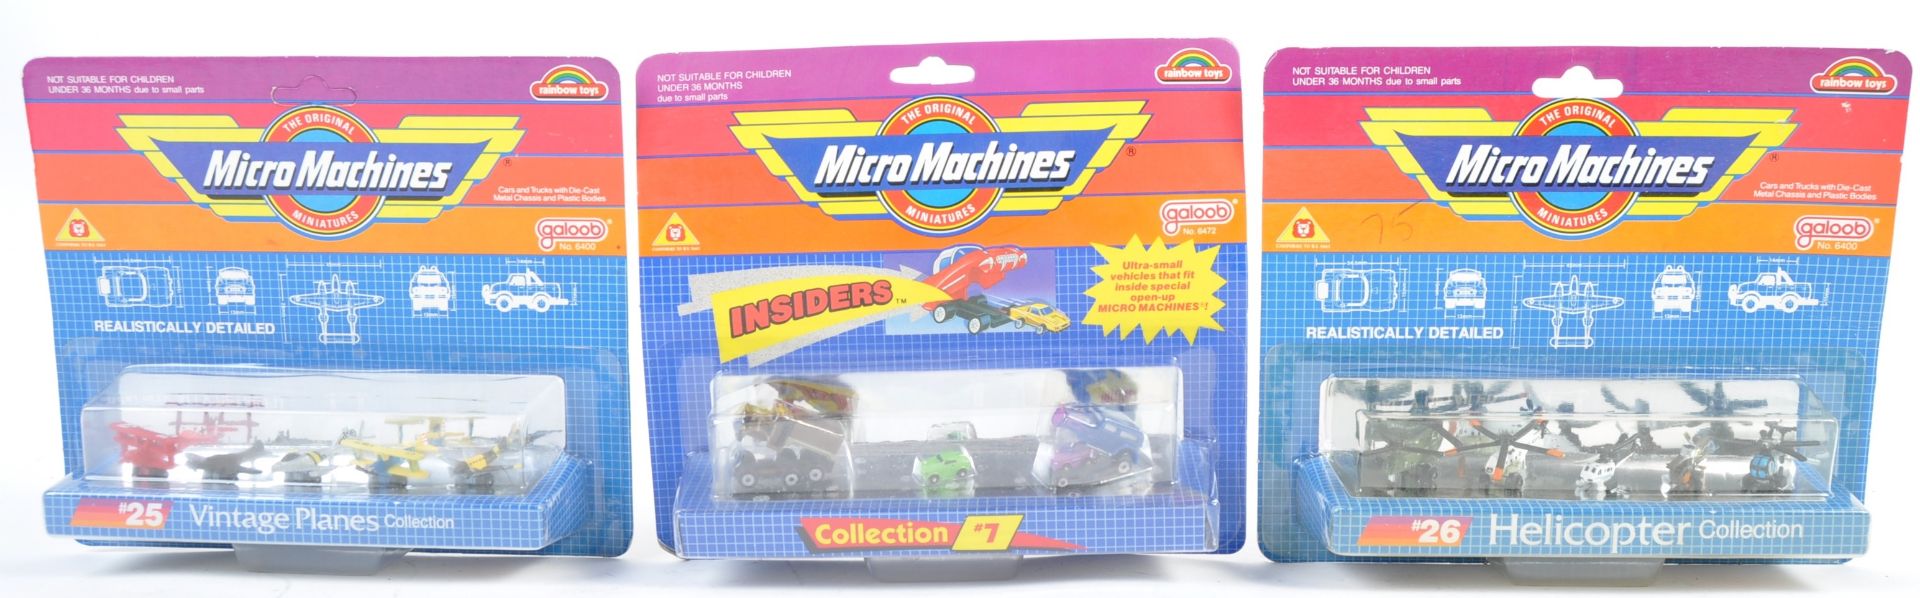 COLLECTION OF VINTAGE CARDED MICRO MACHINES MODELS